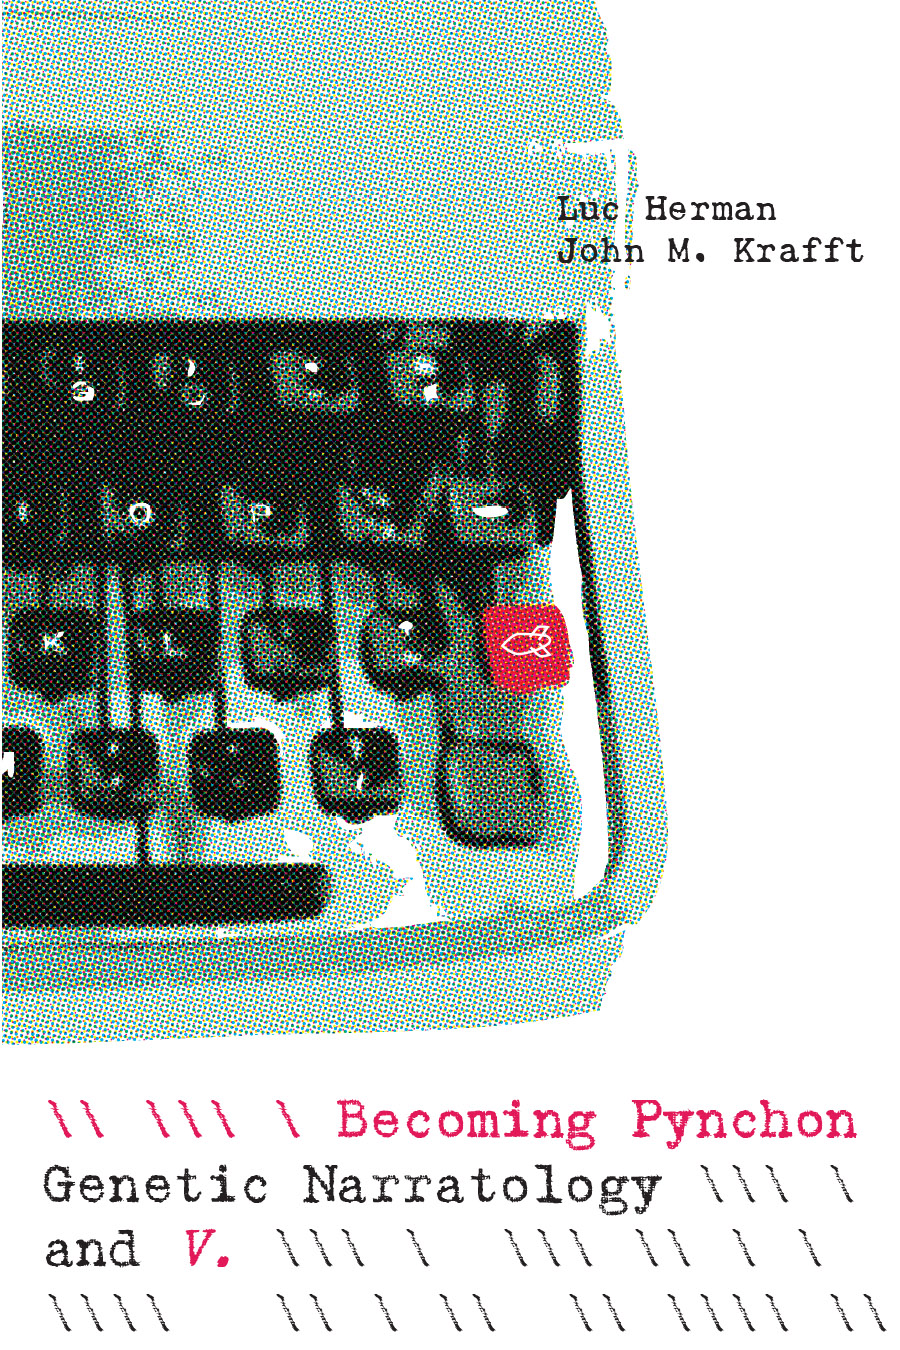 Front cover of Becoming Pynchon: Genetic Narratology and V., by Luc Herman and John M. Krafft, featuring an image of the right side of a typewriter with the enter key replaced with a red bomb symbol.